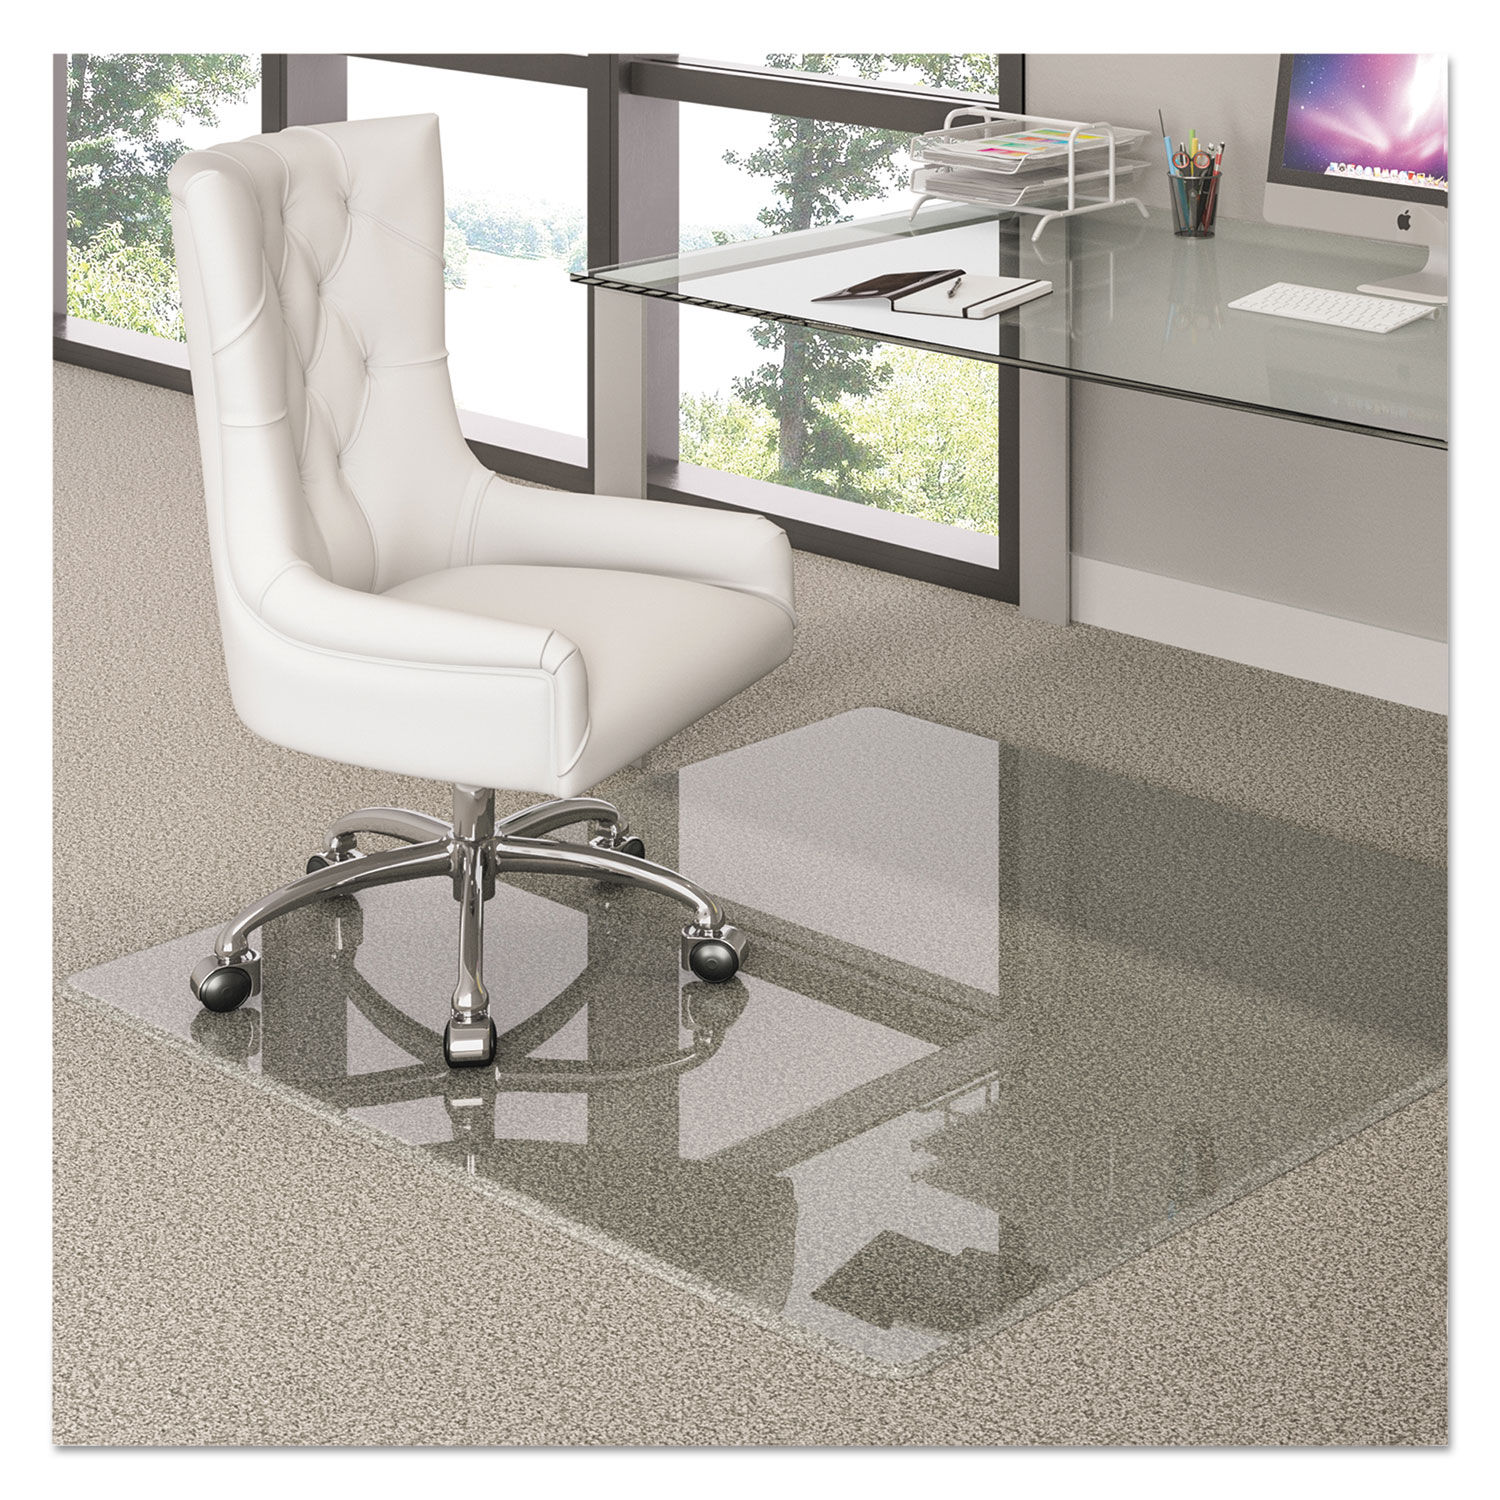 Premium Glass All Day Use Chair Mat - All Floor Types 48 x 60, Rectangular, Clear